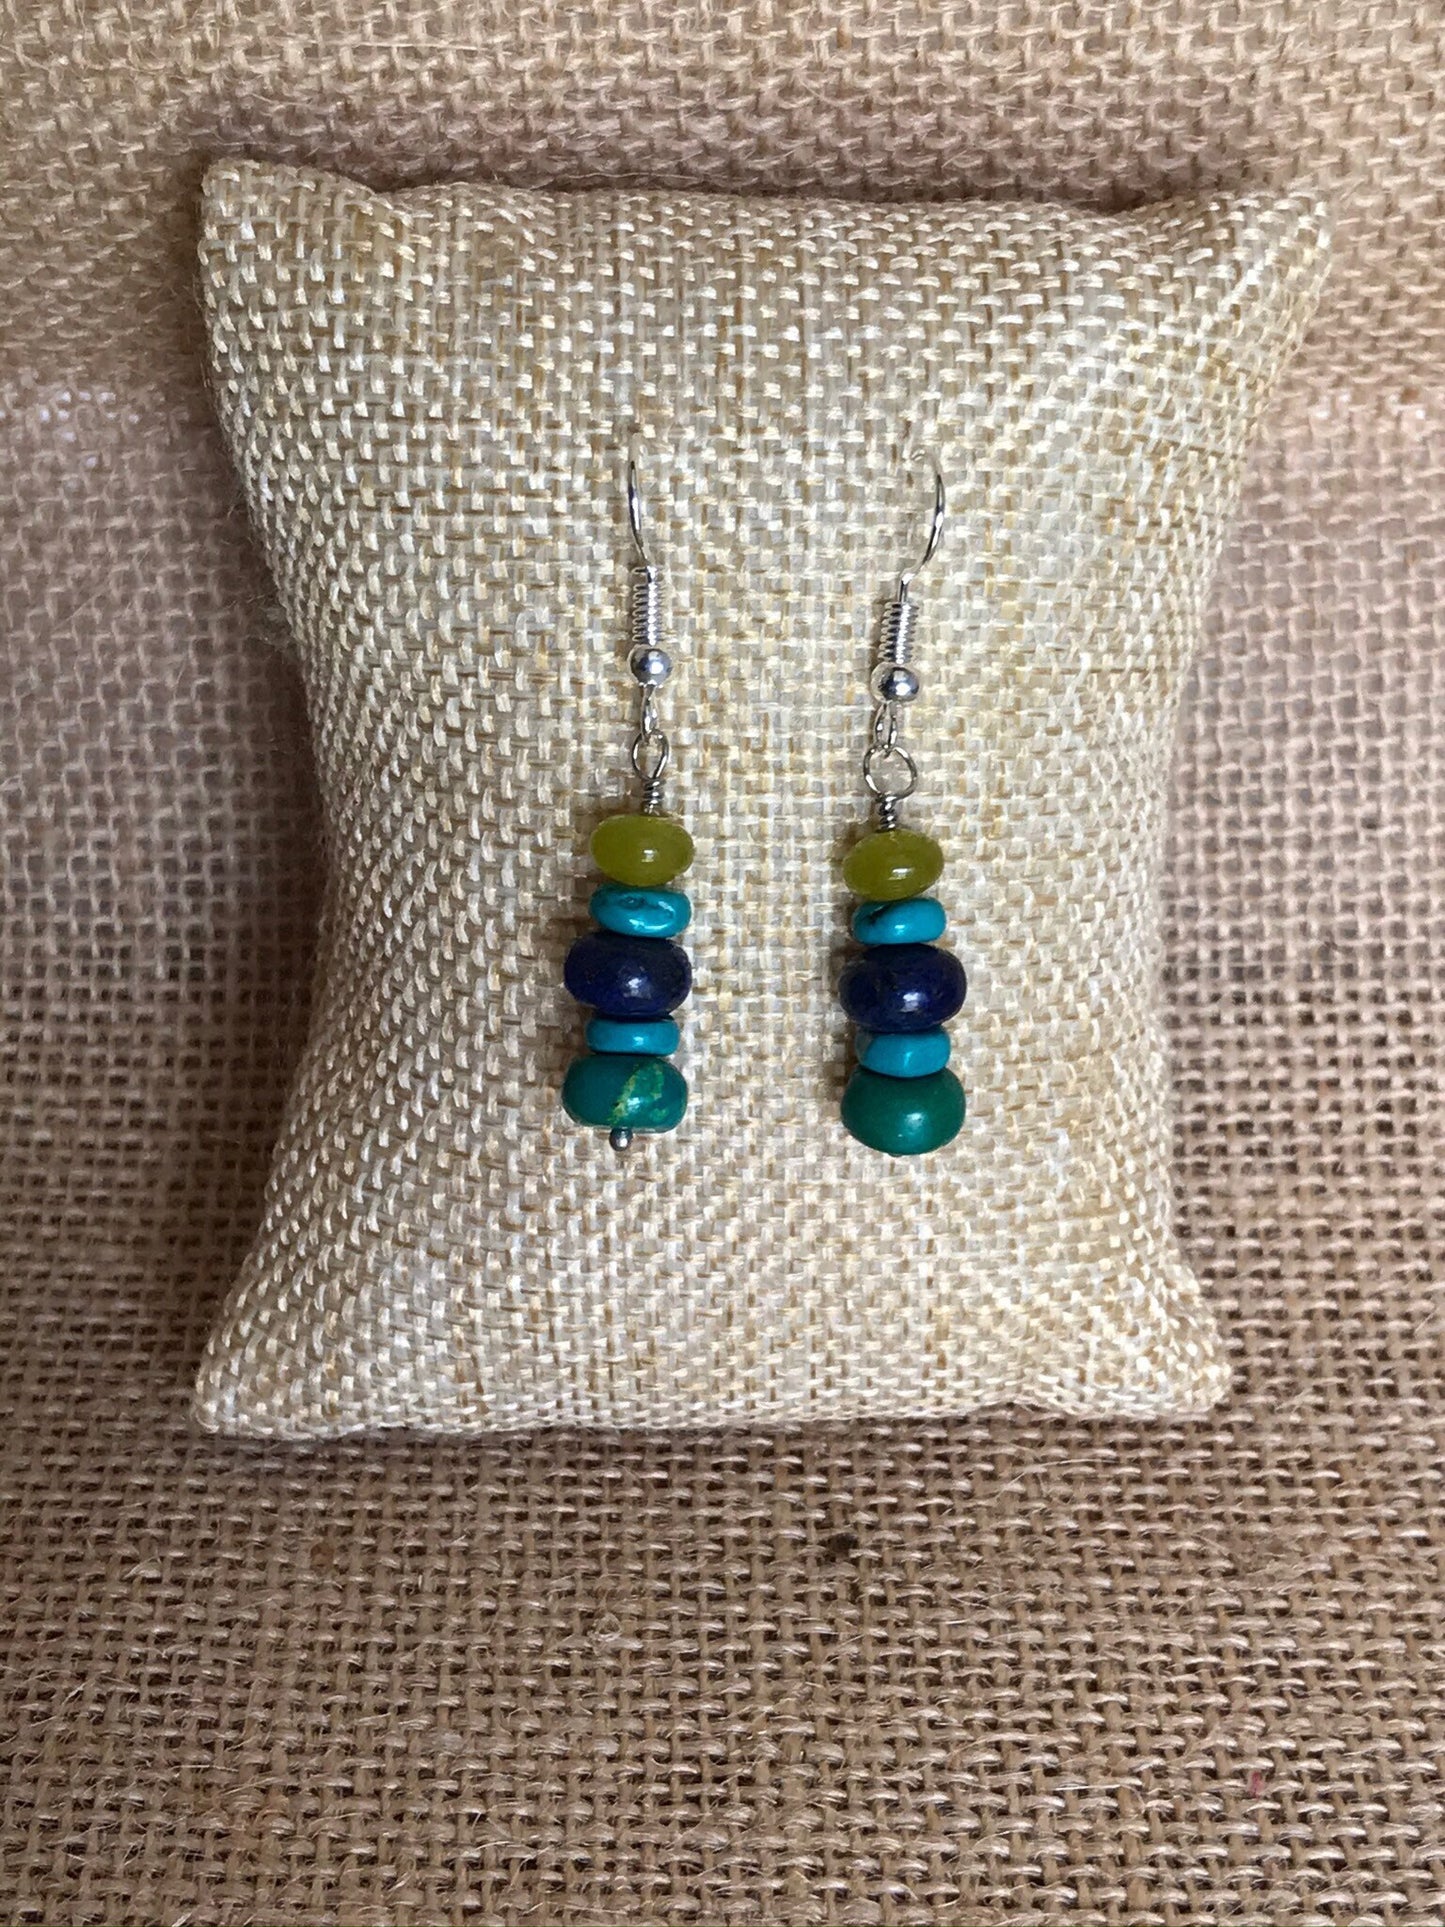 Turquoise Earrings, Turquoise Lapis Jade Earrings, Handmade Gemstone Earrings, Blue Earrings, Sterling Silver Custom Available Gift Present